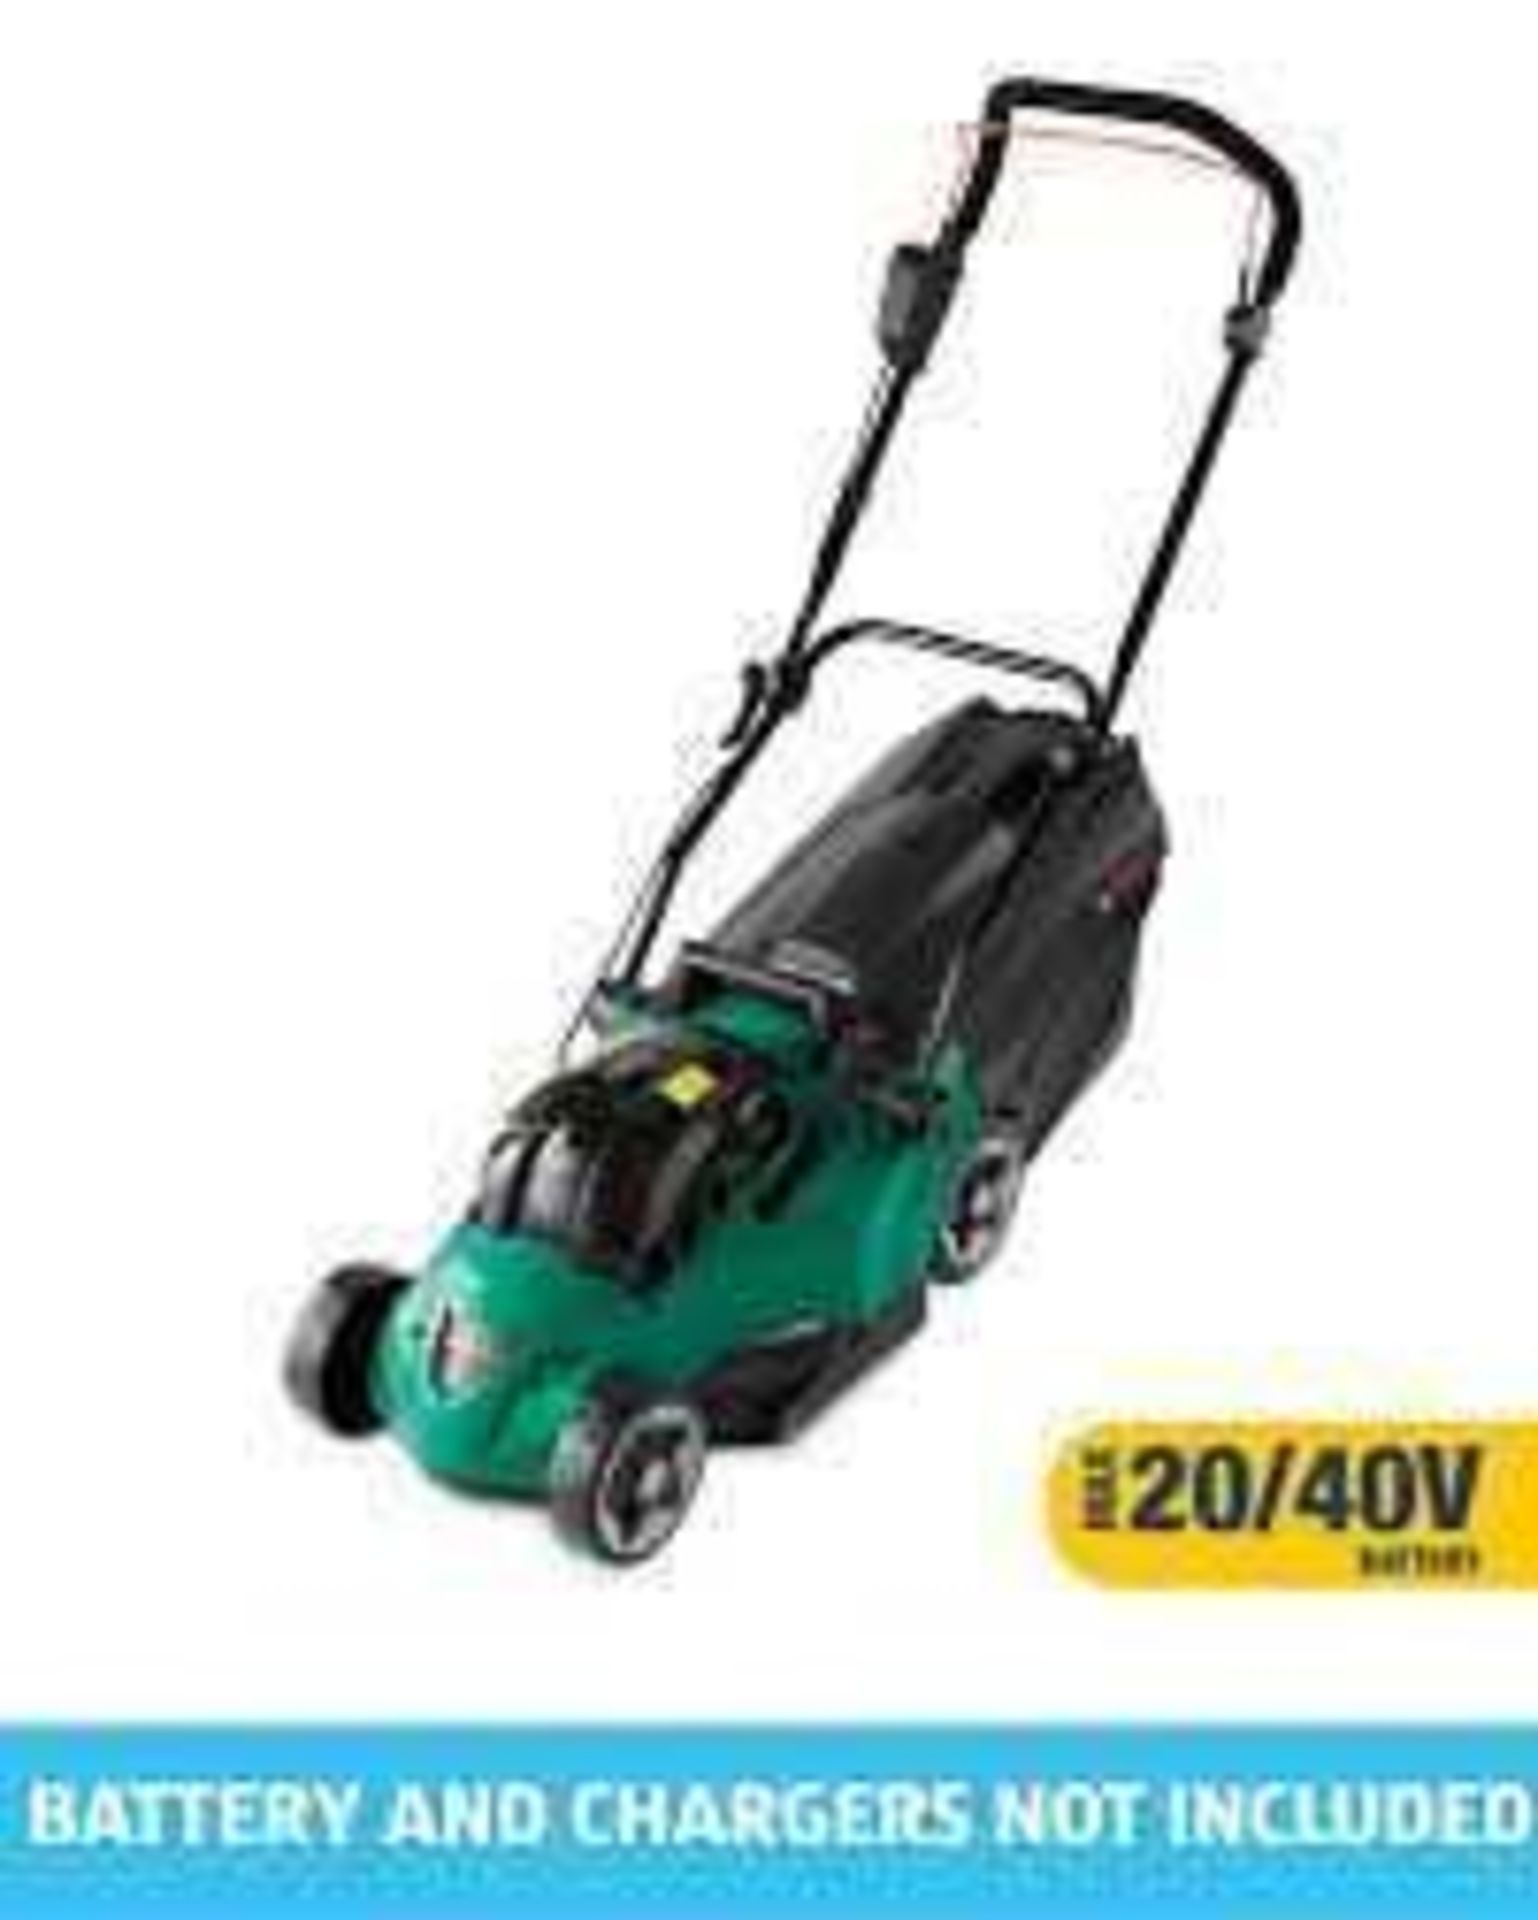 Combined RRP £120 Lot To Contain Two Boxed Ferrex 40 V Cordless Lawnmowers - Image 2 of 2